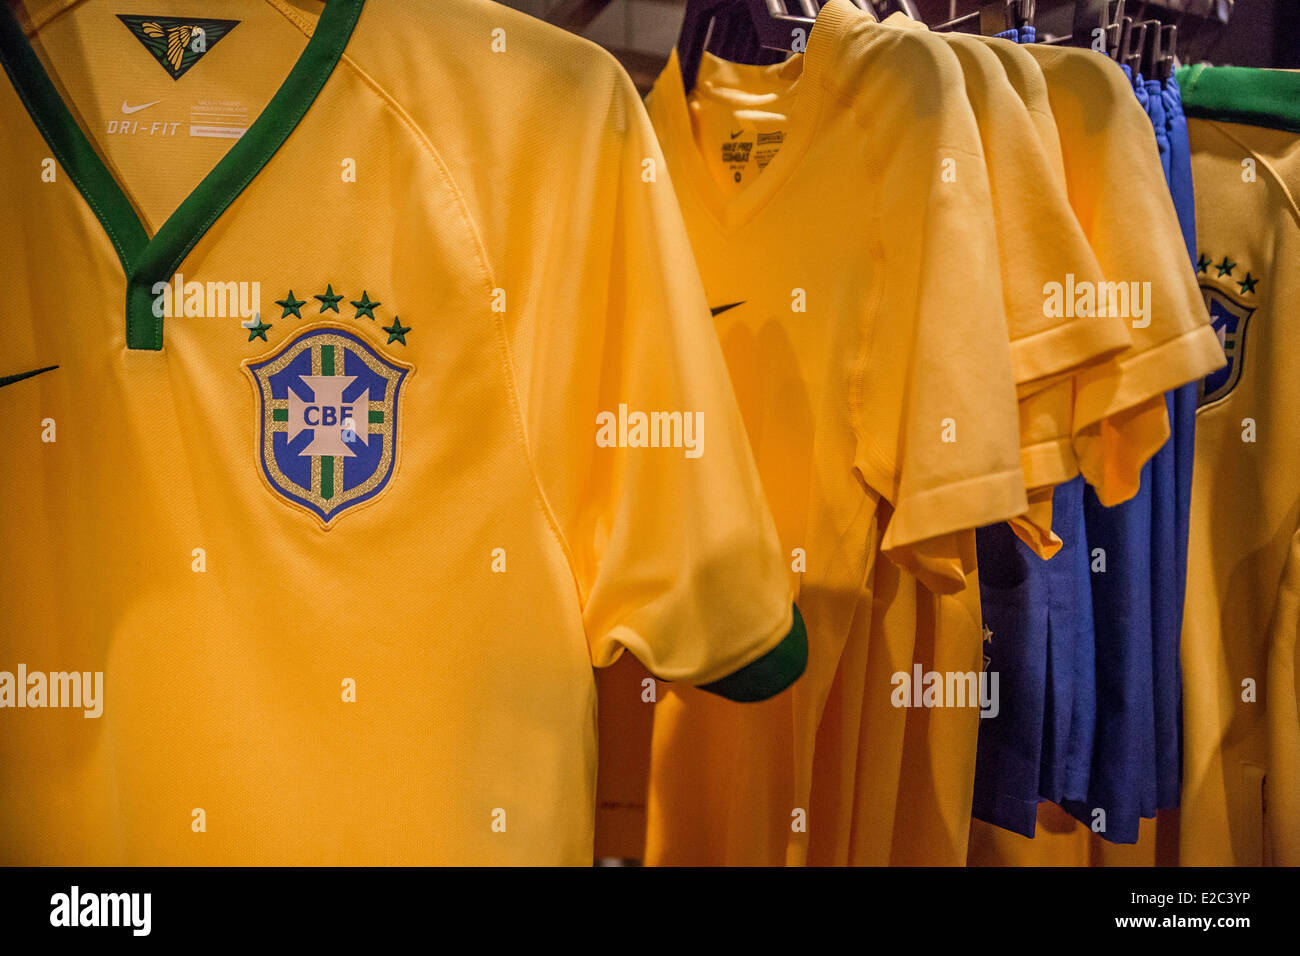 New York, NY, US. 18th June, 2014. At the Nike flagship store in midtown Manhattan the World Cup in Brazil is good for buisiness. Soccer tops and anything to do with the World Cup in Brazil are flying off of the shelves. America has arrived on the biggest soccer stage and there is World Cup fever. A Brazil or U,S. top costs around $100.00 and many people people now support more than one team. Soccer is big buisiness and companys like Nike support everyone. Stock Photo